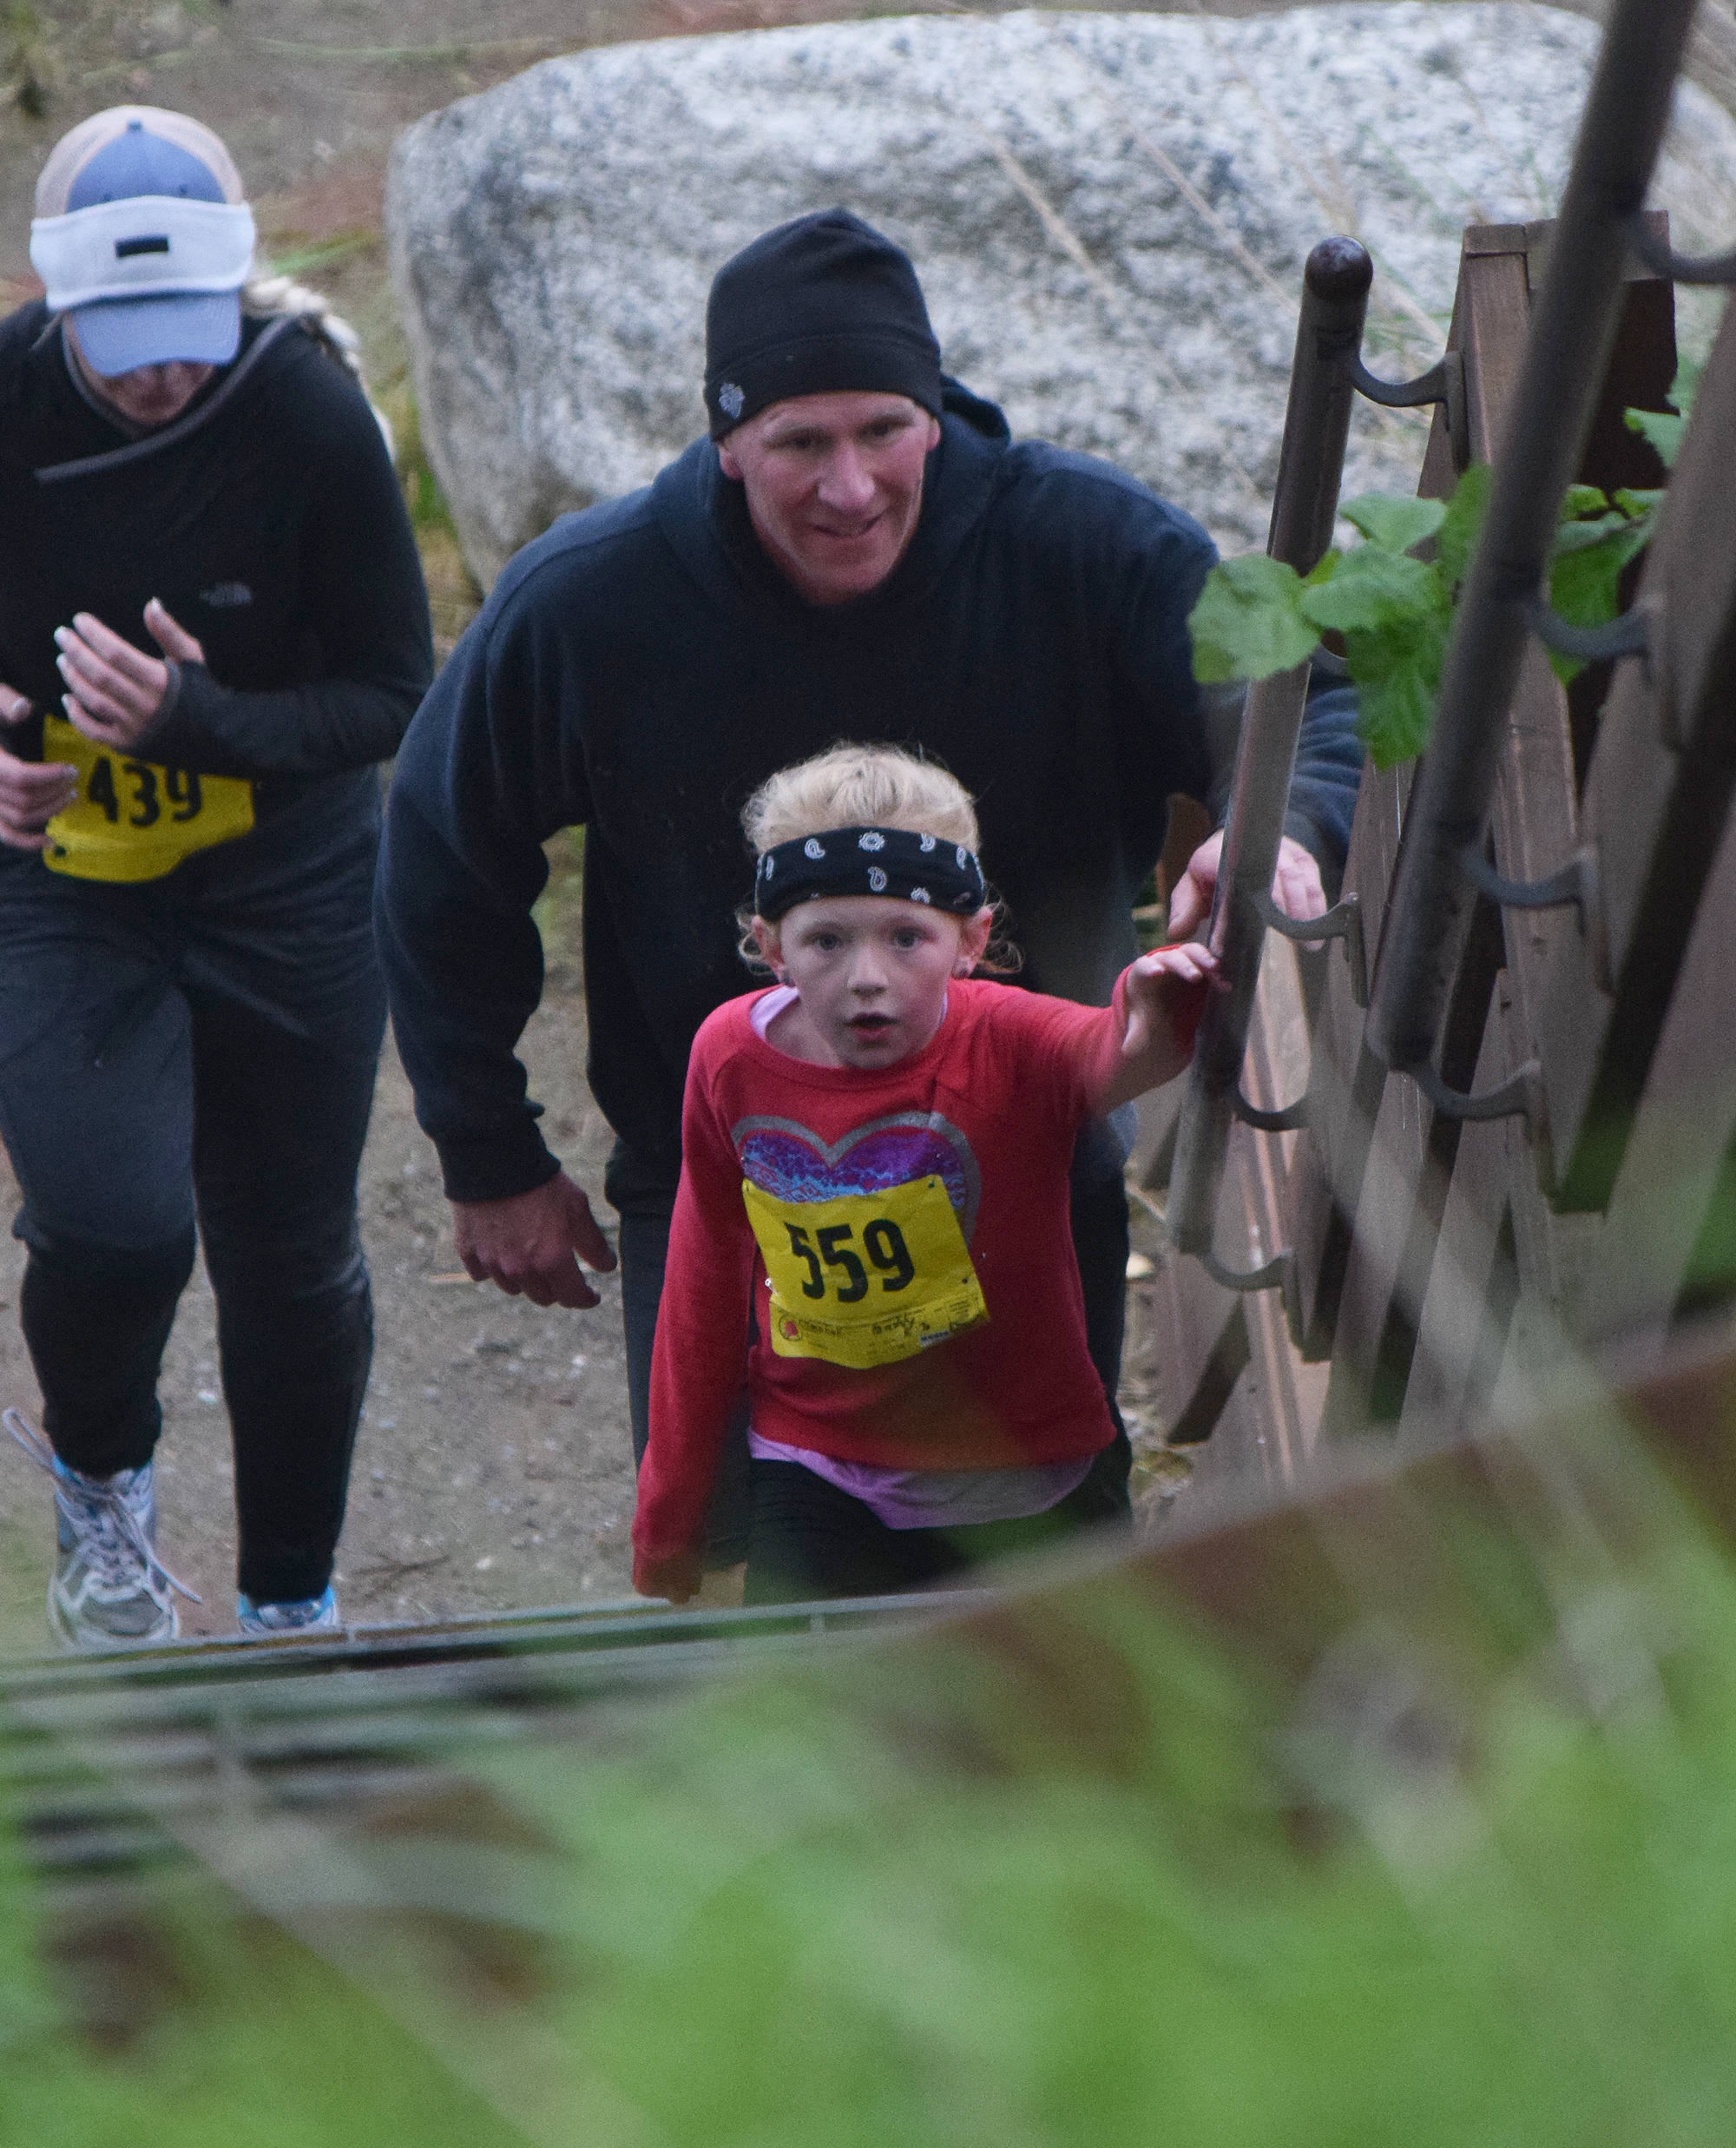 Maddy (559) and John Campbell begin the final ascent up the stairs Saturday at the fourth annual Clam Scramble 5K in Ninilchik. (Photo by Joey Klecka/Peninsula Clarion)